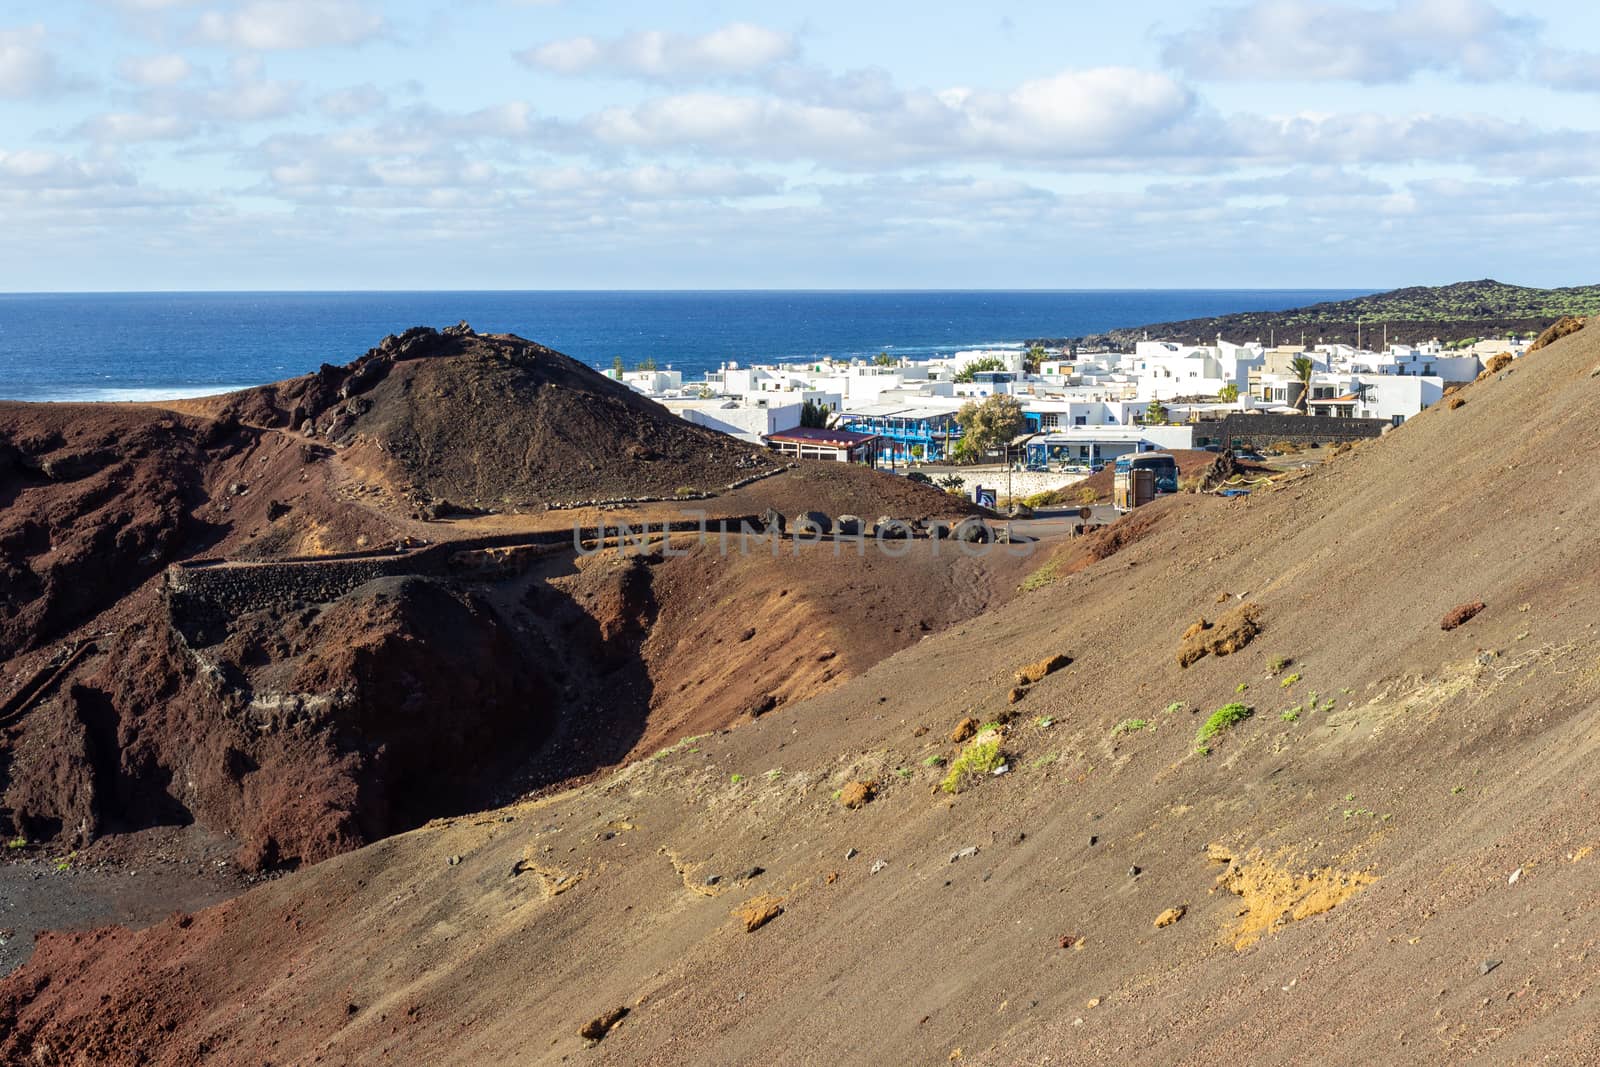 Panoramic view on the coastline of El Golfo with red and black colored volcanic rock formations and lava fields in the southwest of canary island Lanzarote